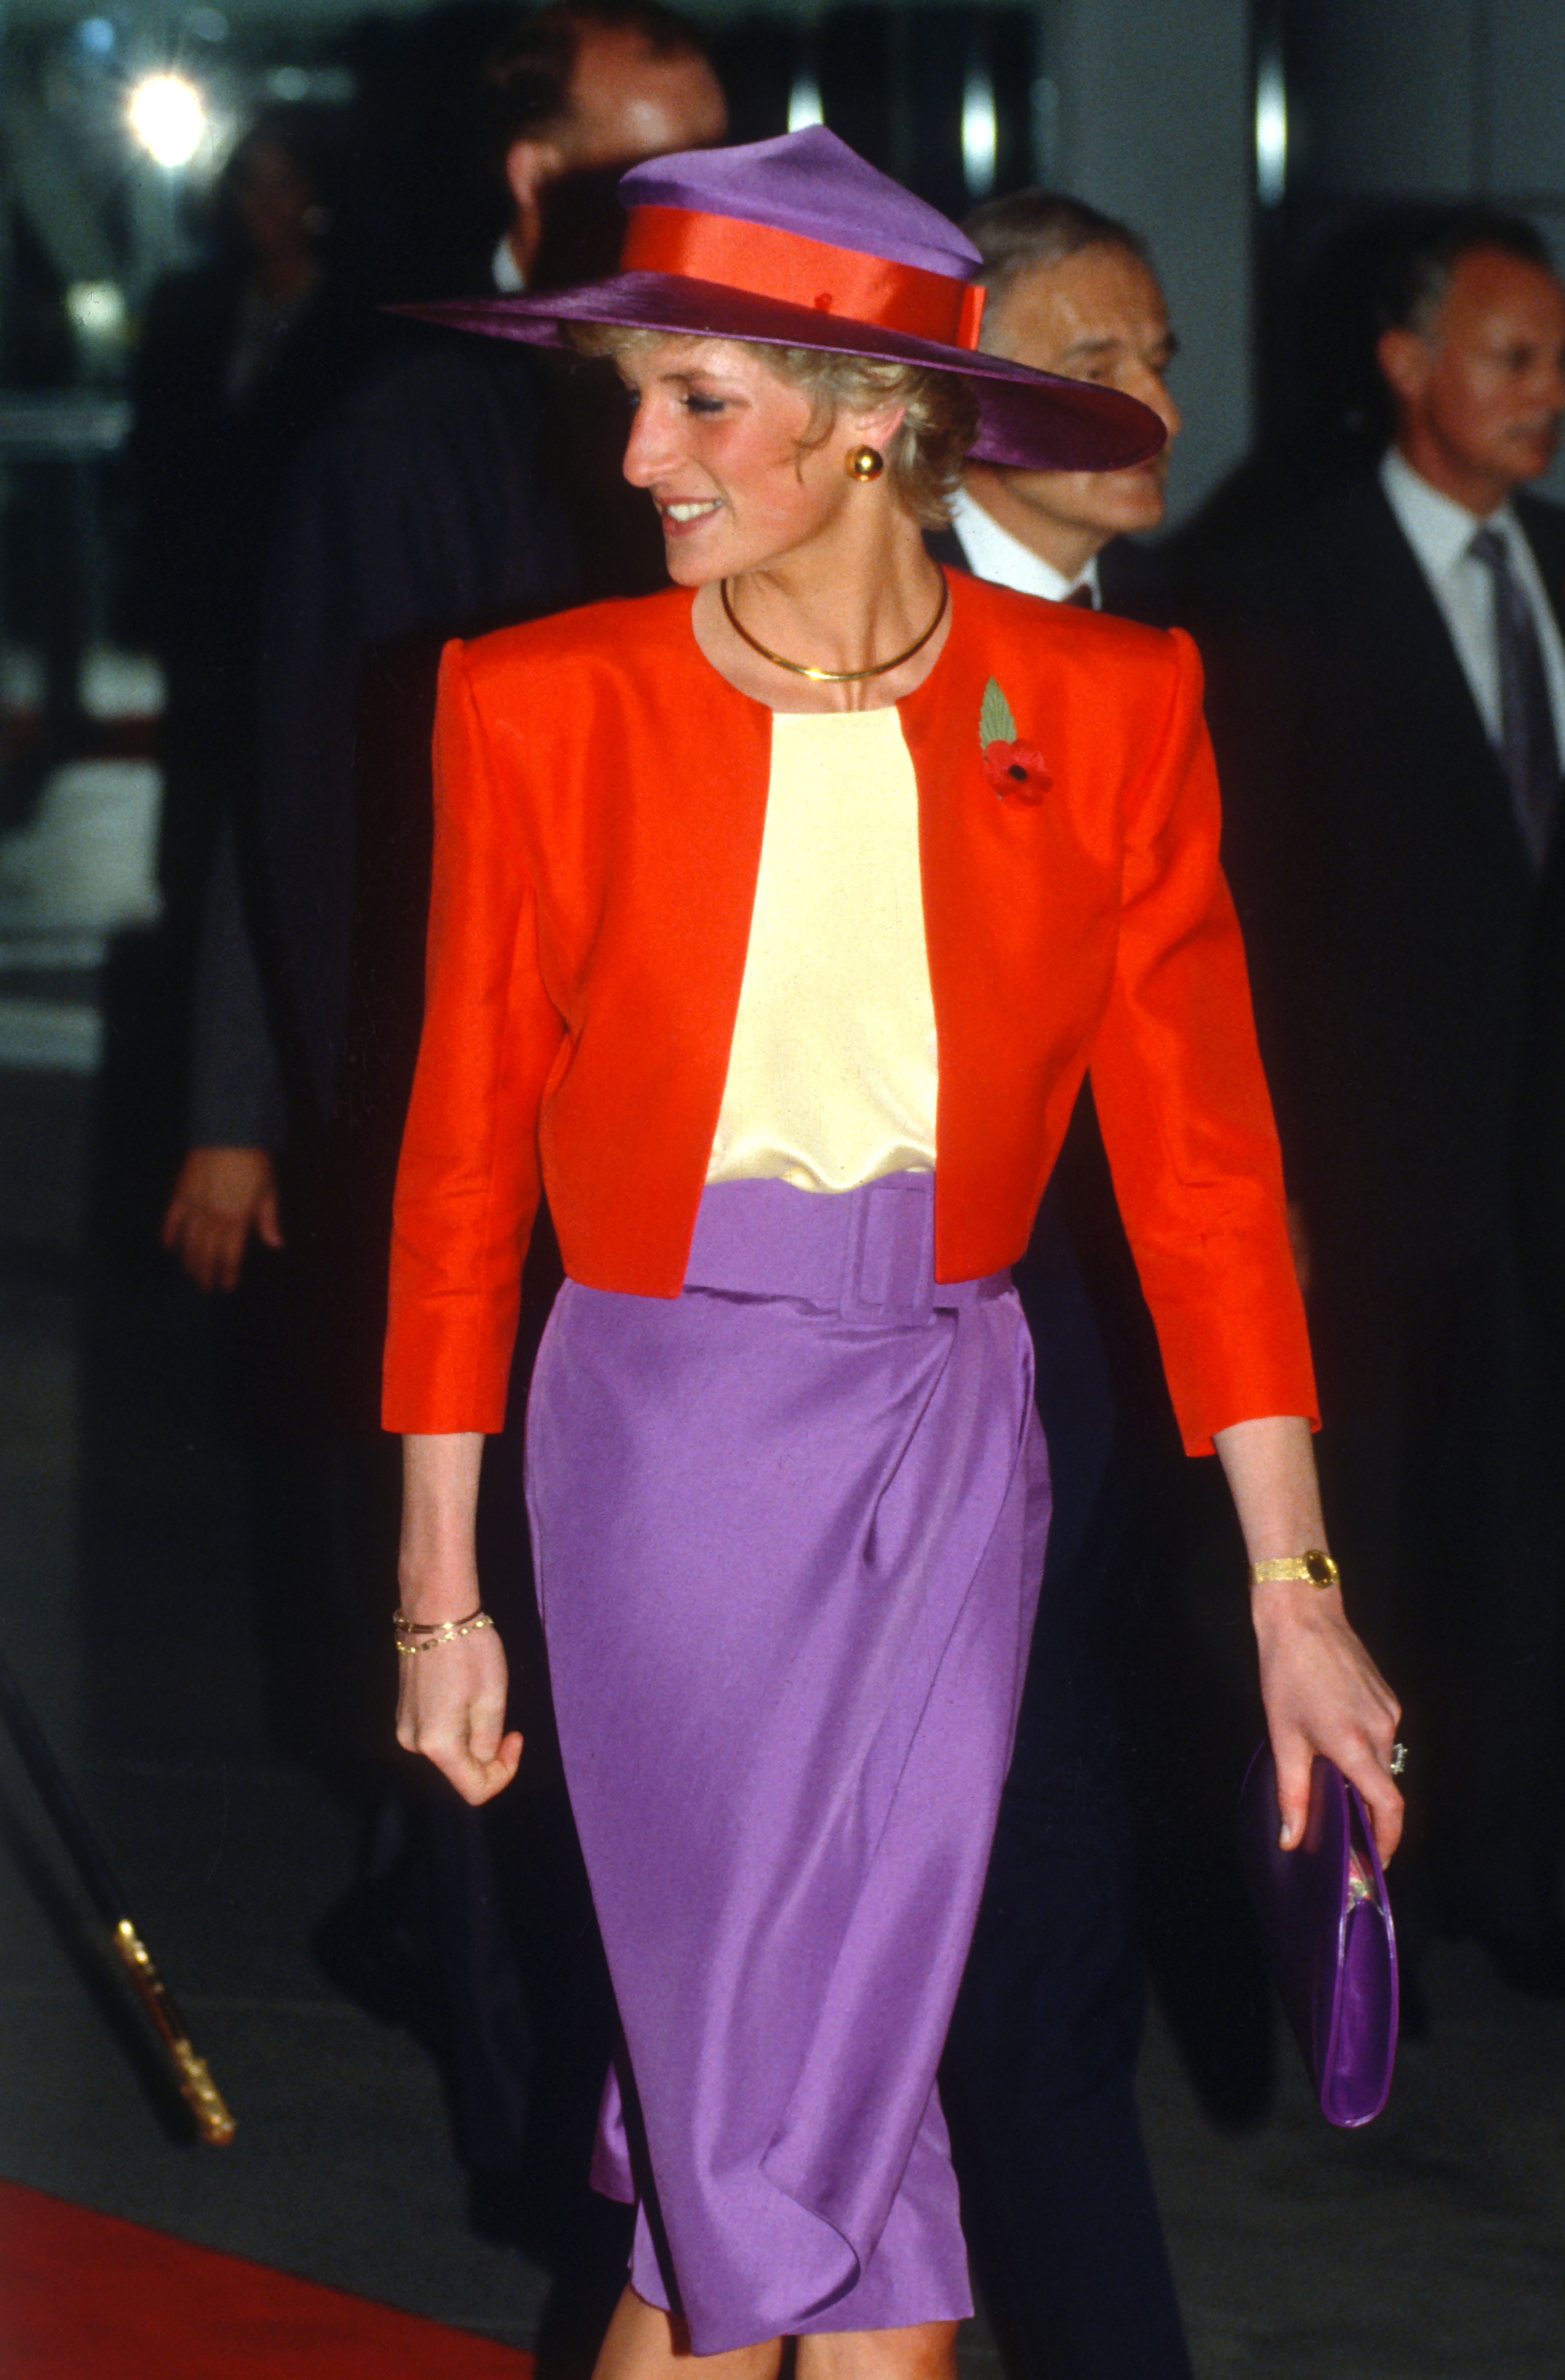 Princess Diana during the Governor's launch on November 7, 1989 in Hong Kong, China. | Source: Getty Images